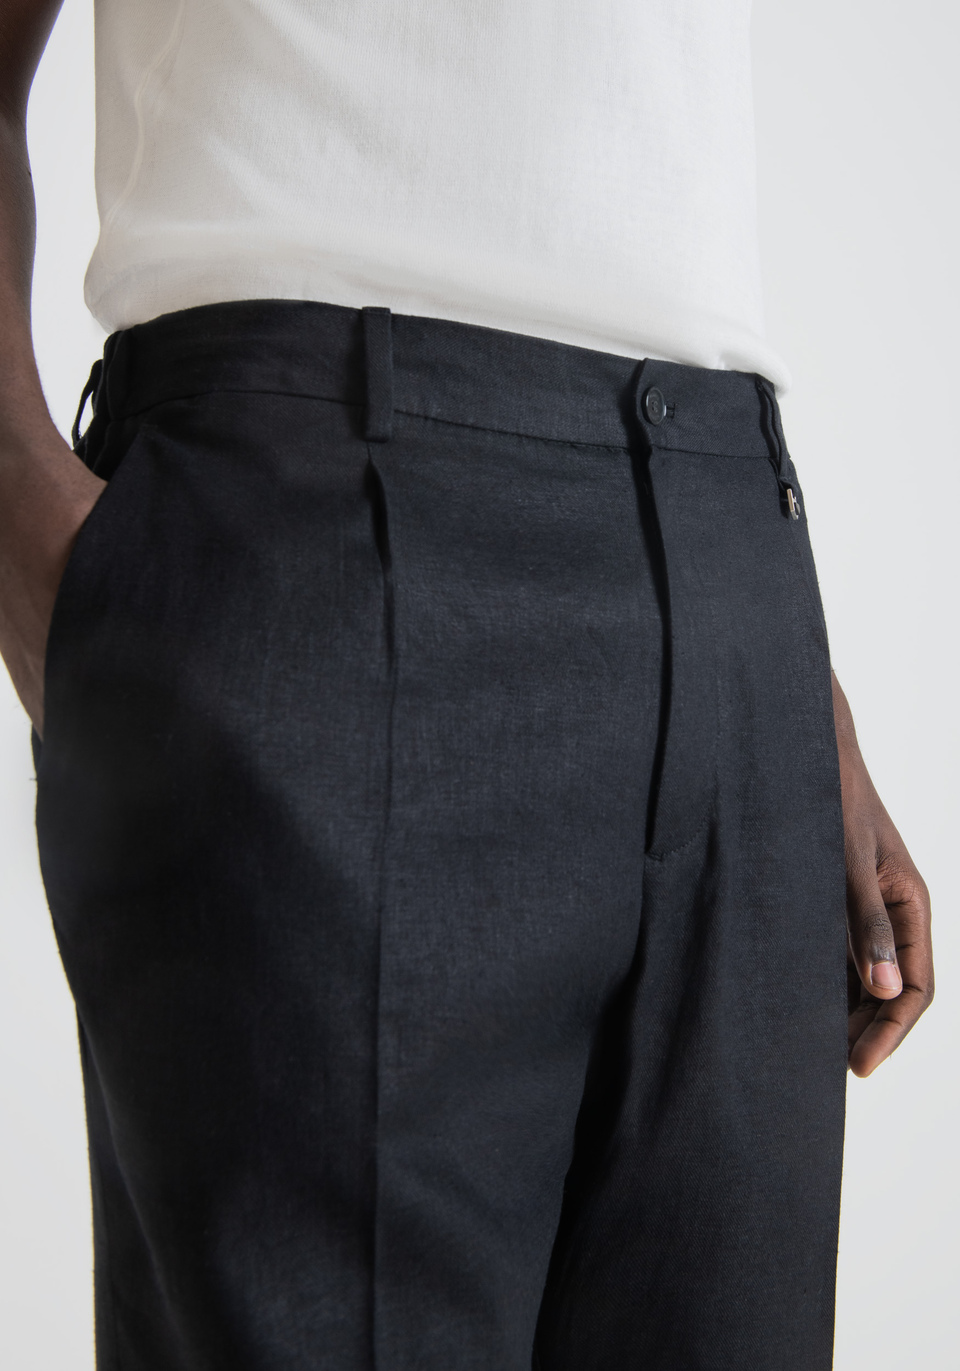 "GUSTAF" CARROT-FIT SHORTS IN LINEN BLEND WITH CENTRAL PLEAT - Antony Morato Online Shop